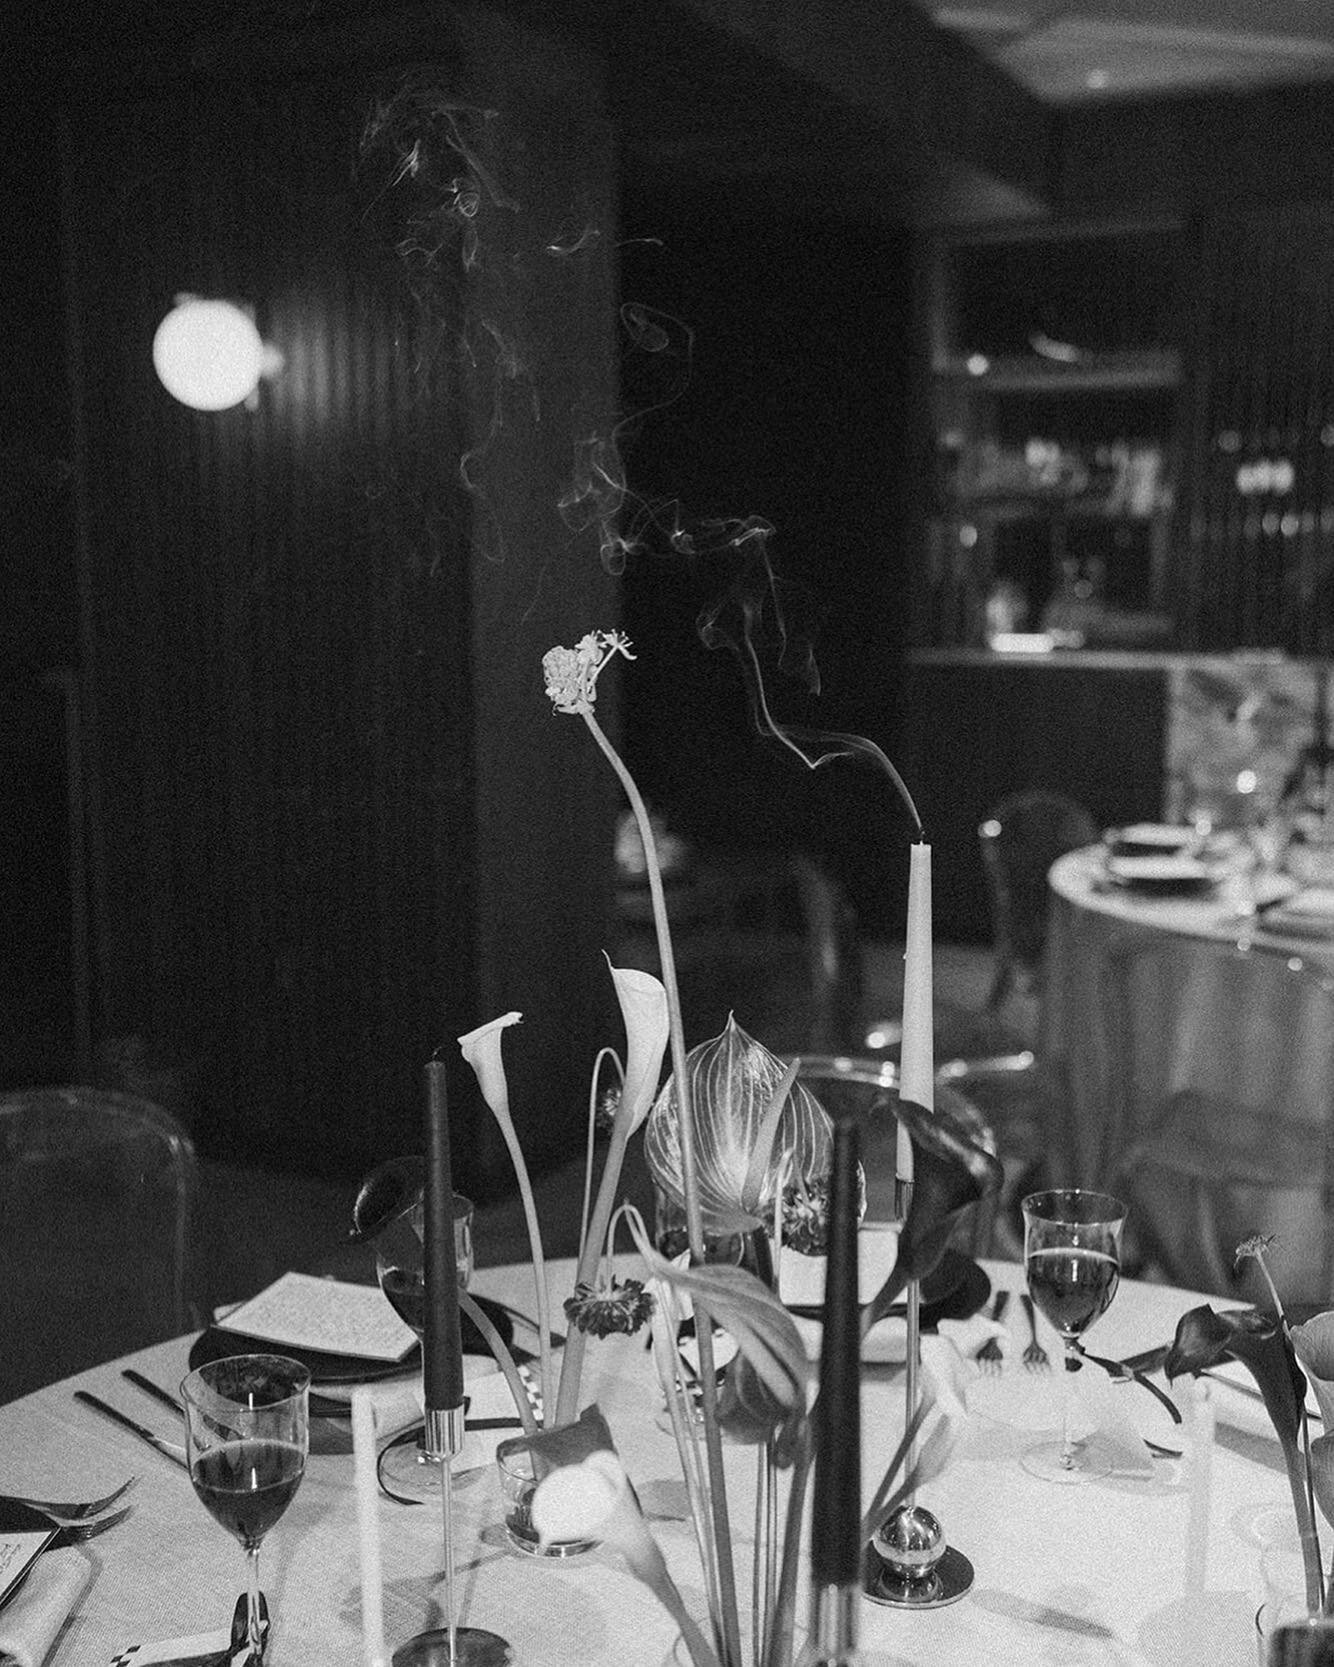 Can&rsquo;t not share this beautiful B&amp;W from @lynnshapirophotography 
Absolute dream team for this shoot as always, love creating magic with you all ❤️ 

Lots more to come 👏🏼

The Palm:
Concept, planning &amp; styling: @abstracteventsuk
Venue: